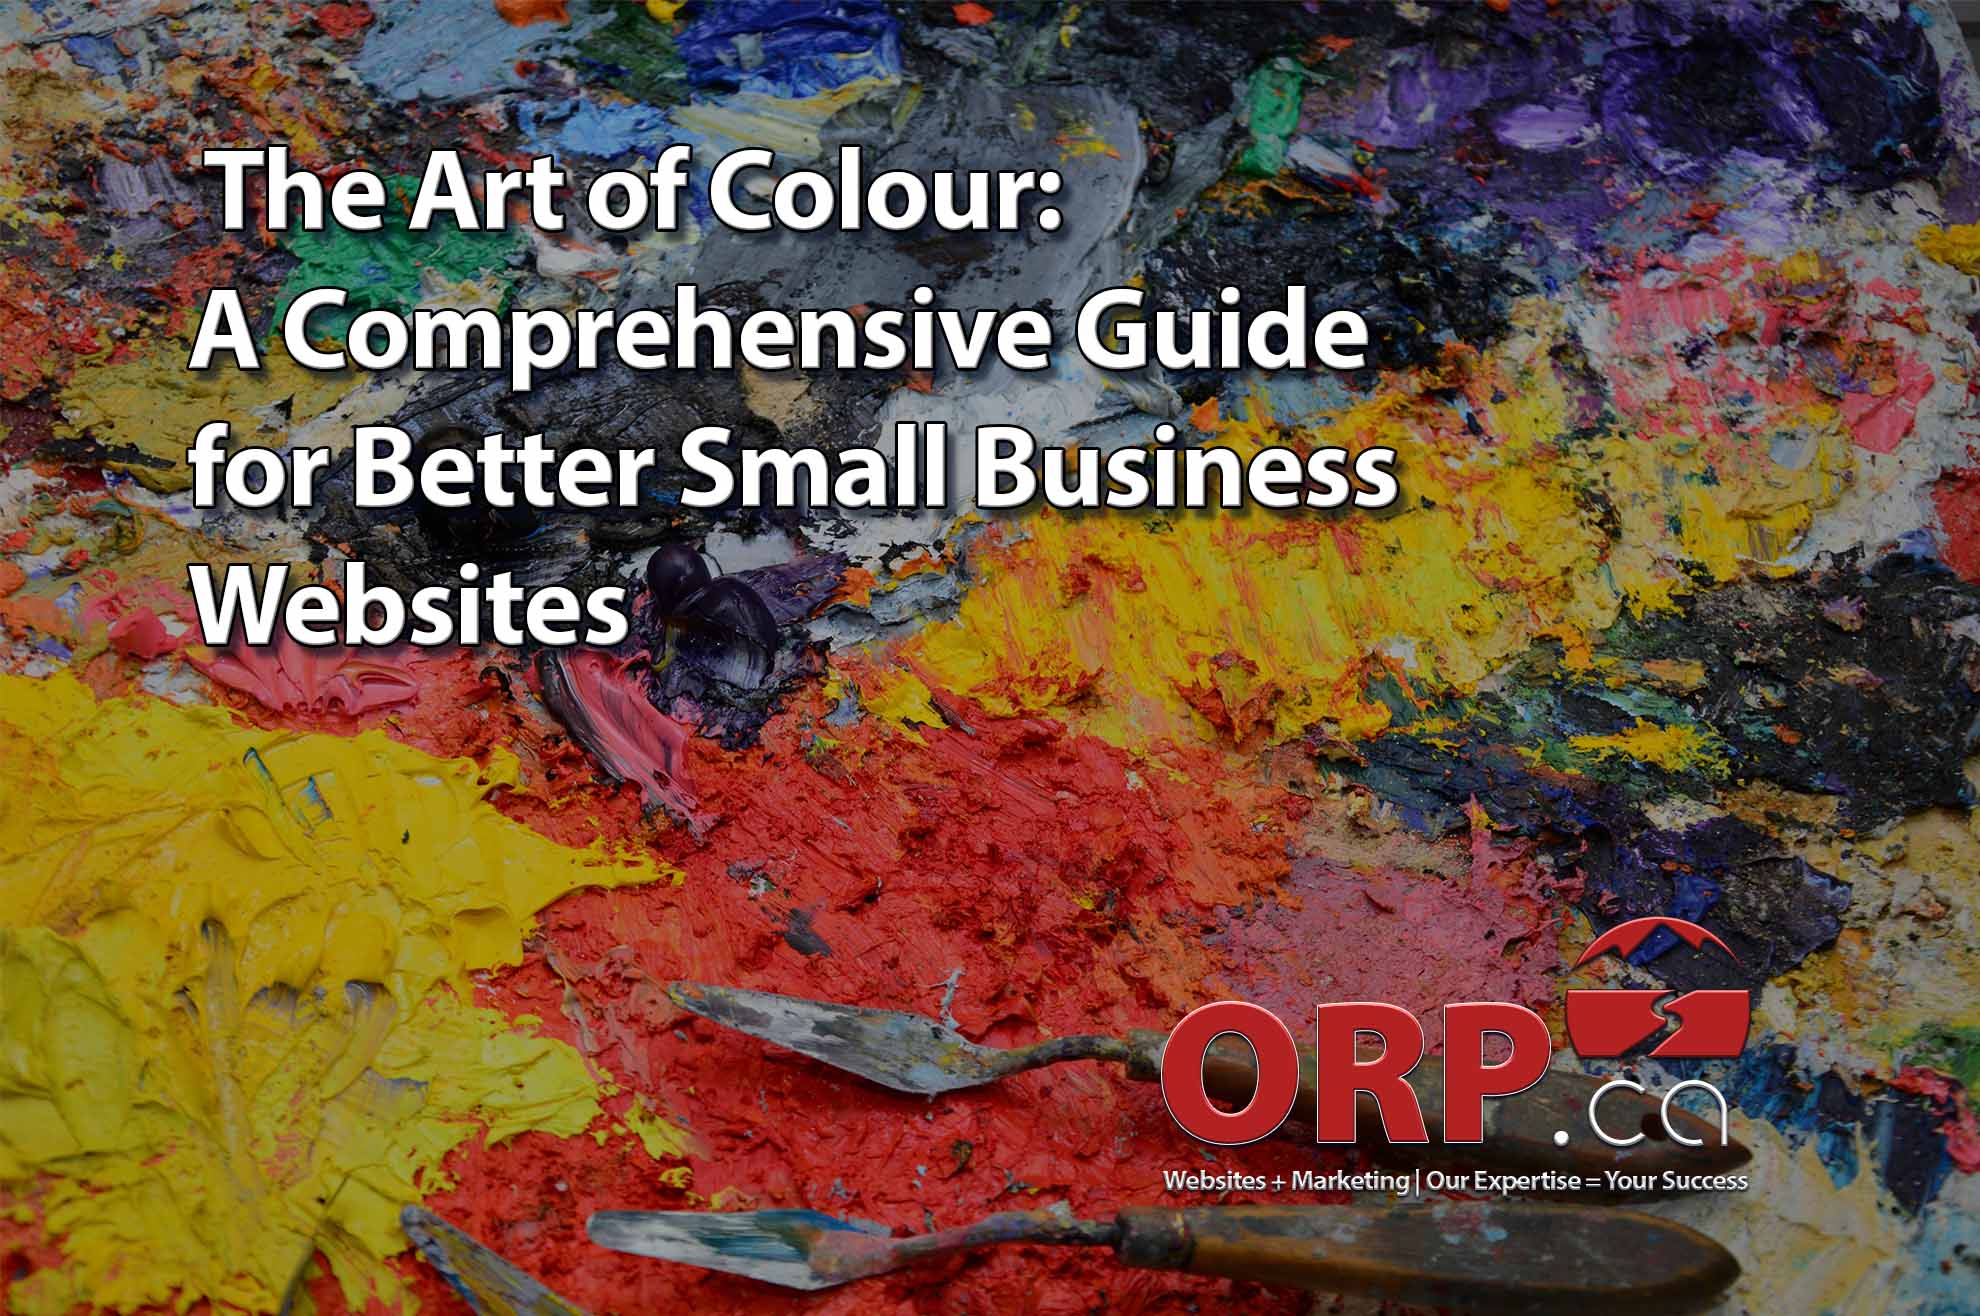  The Art of Colour: A Comprehensive Guide for Better Small Business Websites - a small business website design and development article from ORP.ca, Your Small Business Website and Digital Marketing Services Provide